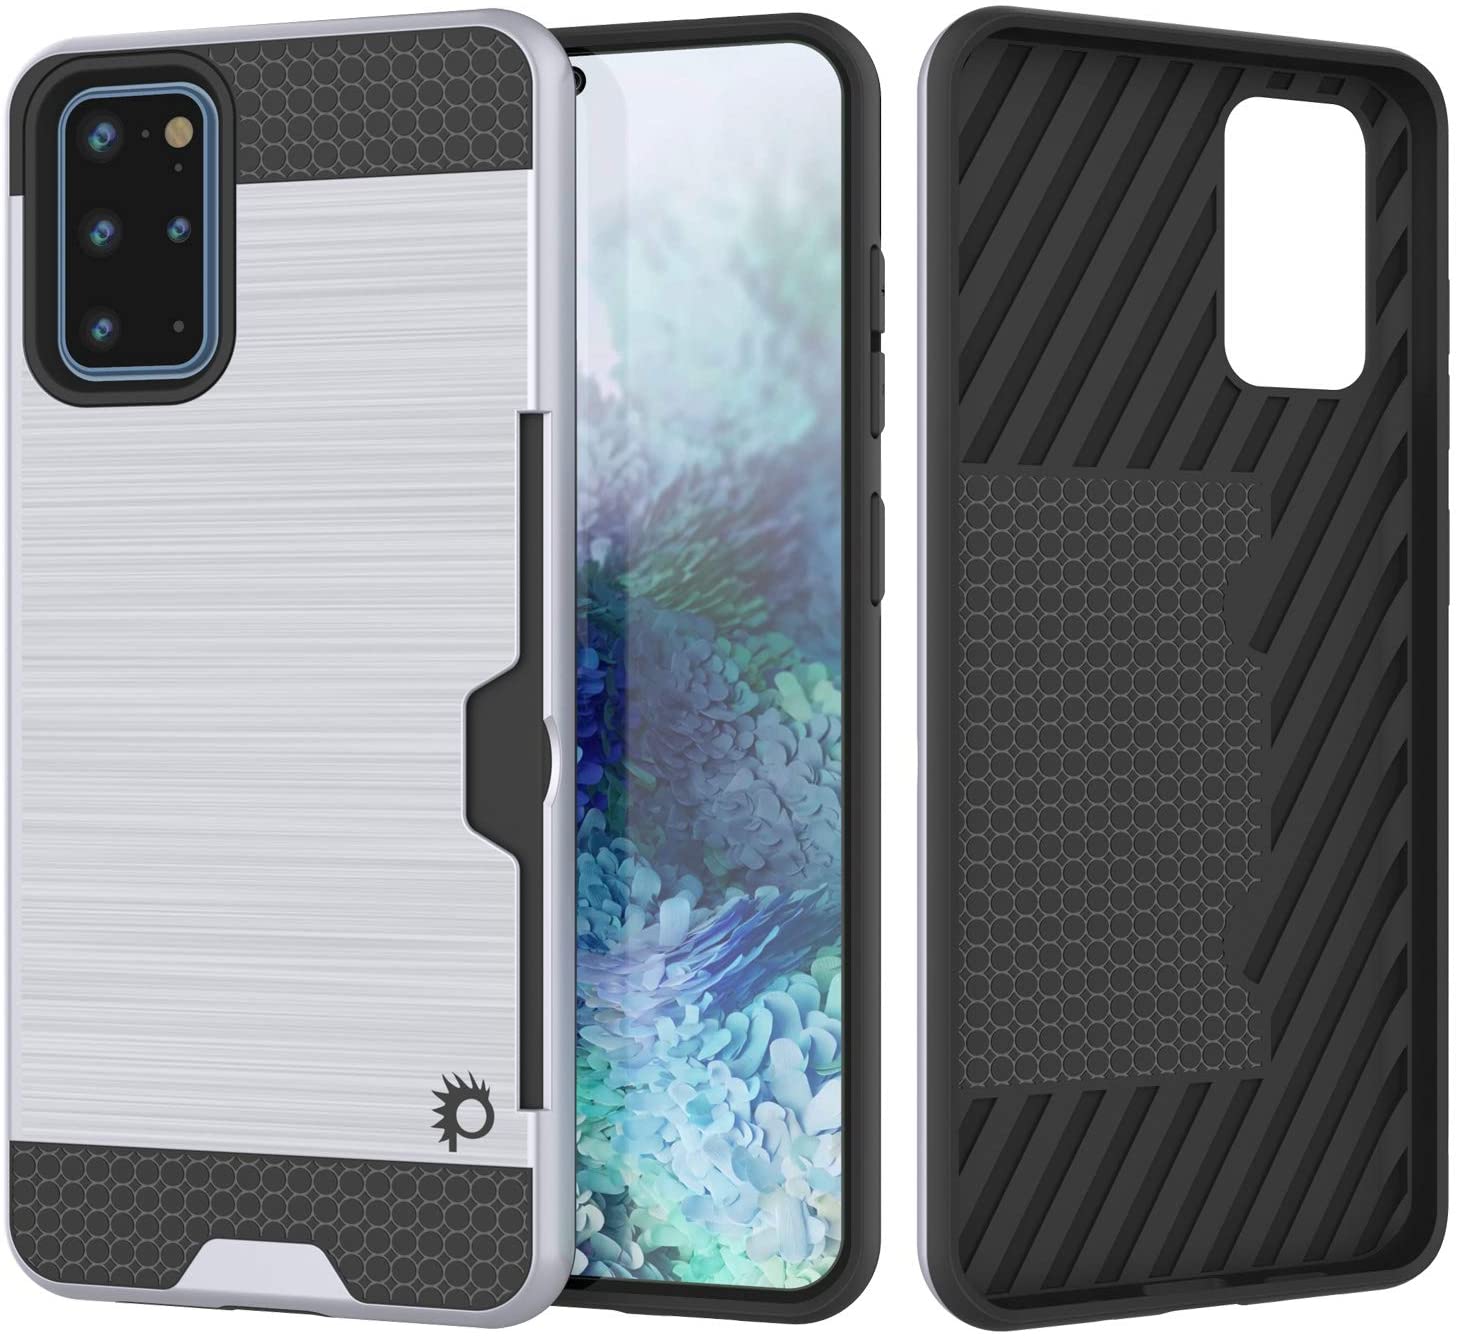 Galaxy S20+ Plus  Case, PUNKcase [SLOT Series] [Slim Fit] Dual-Layer Armor Cover w/Integrated Anti-Shock System, Credit Card Slot [White]